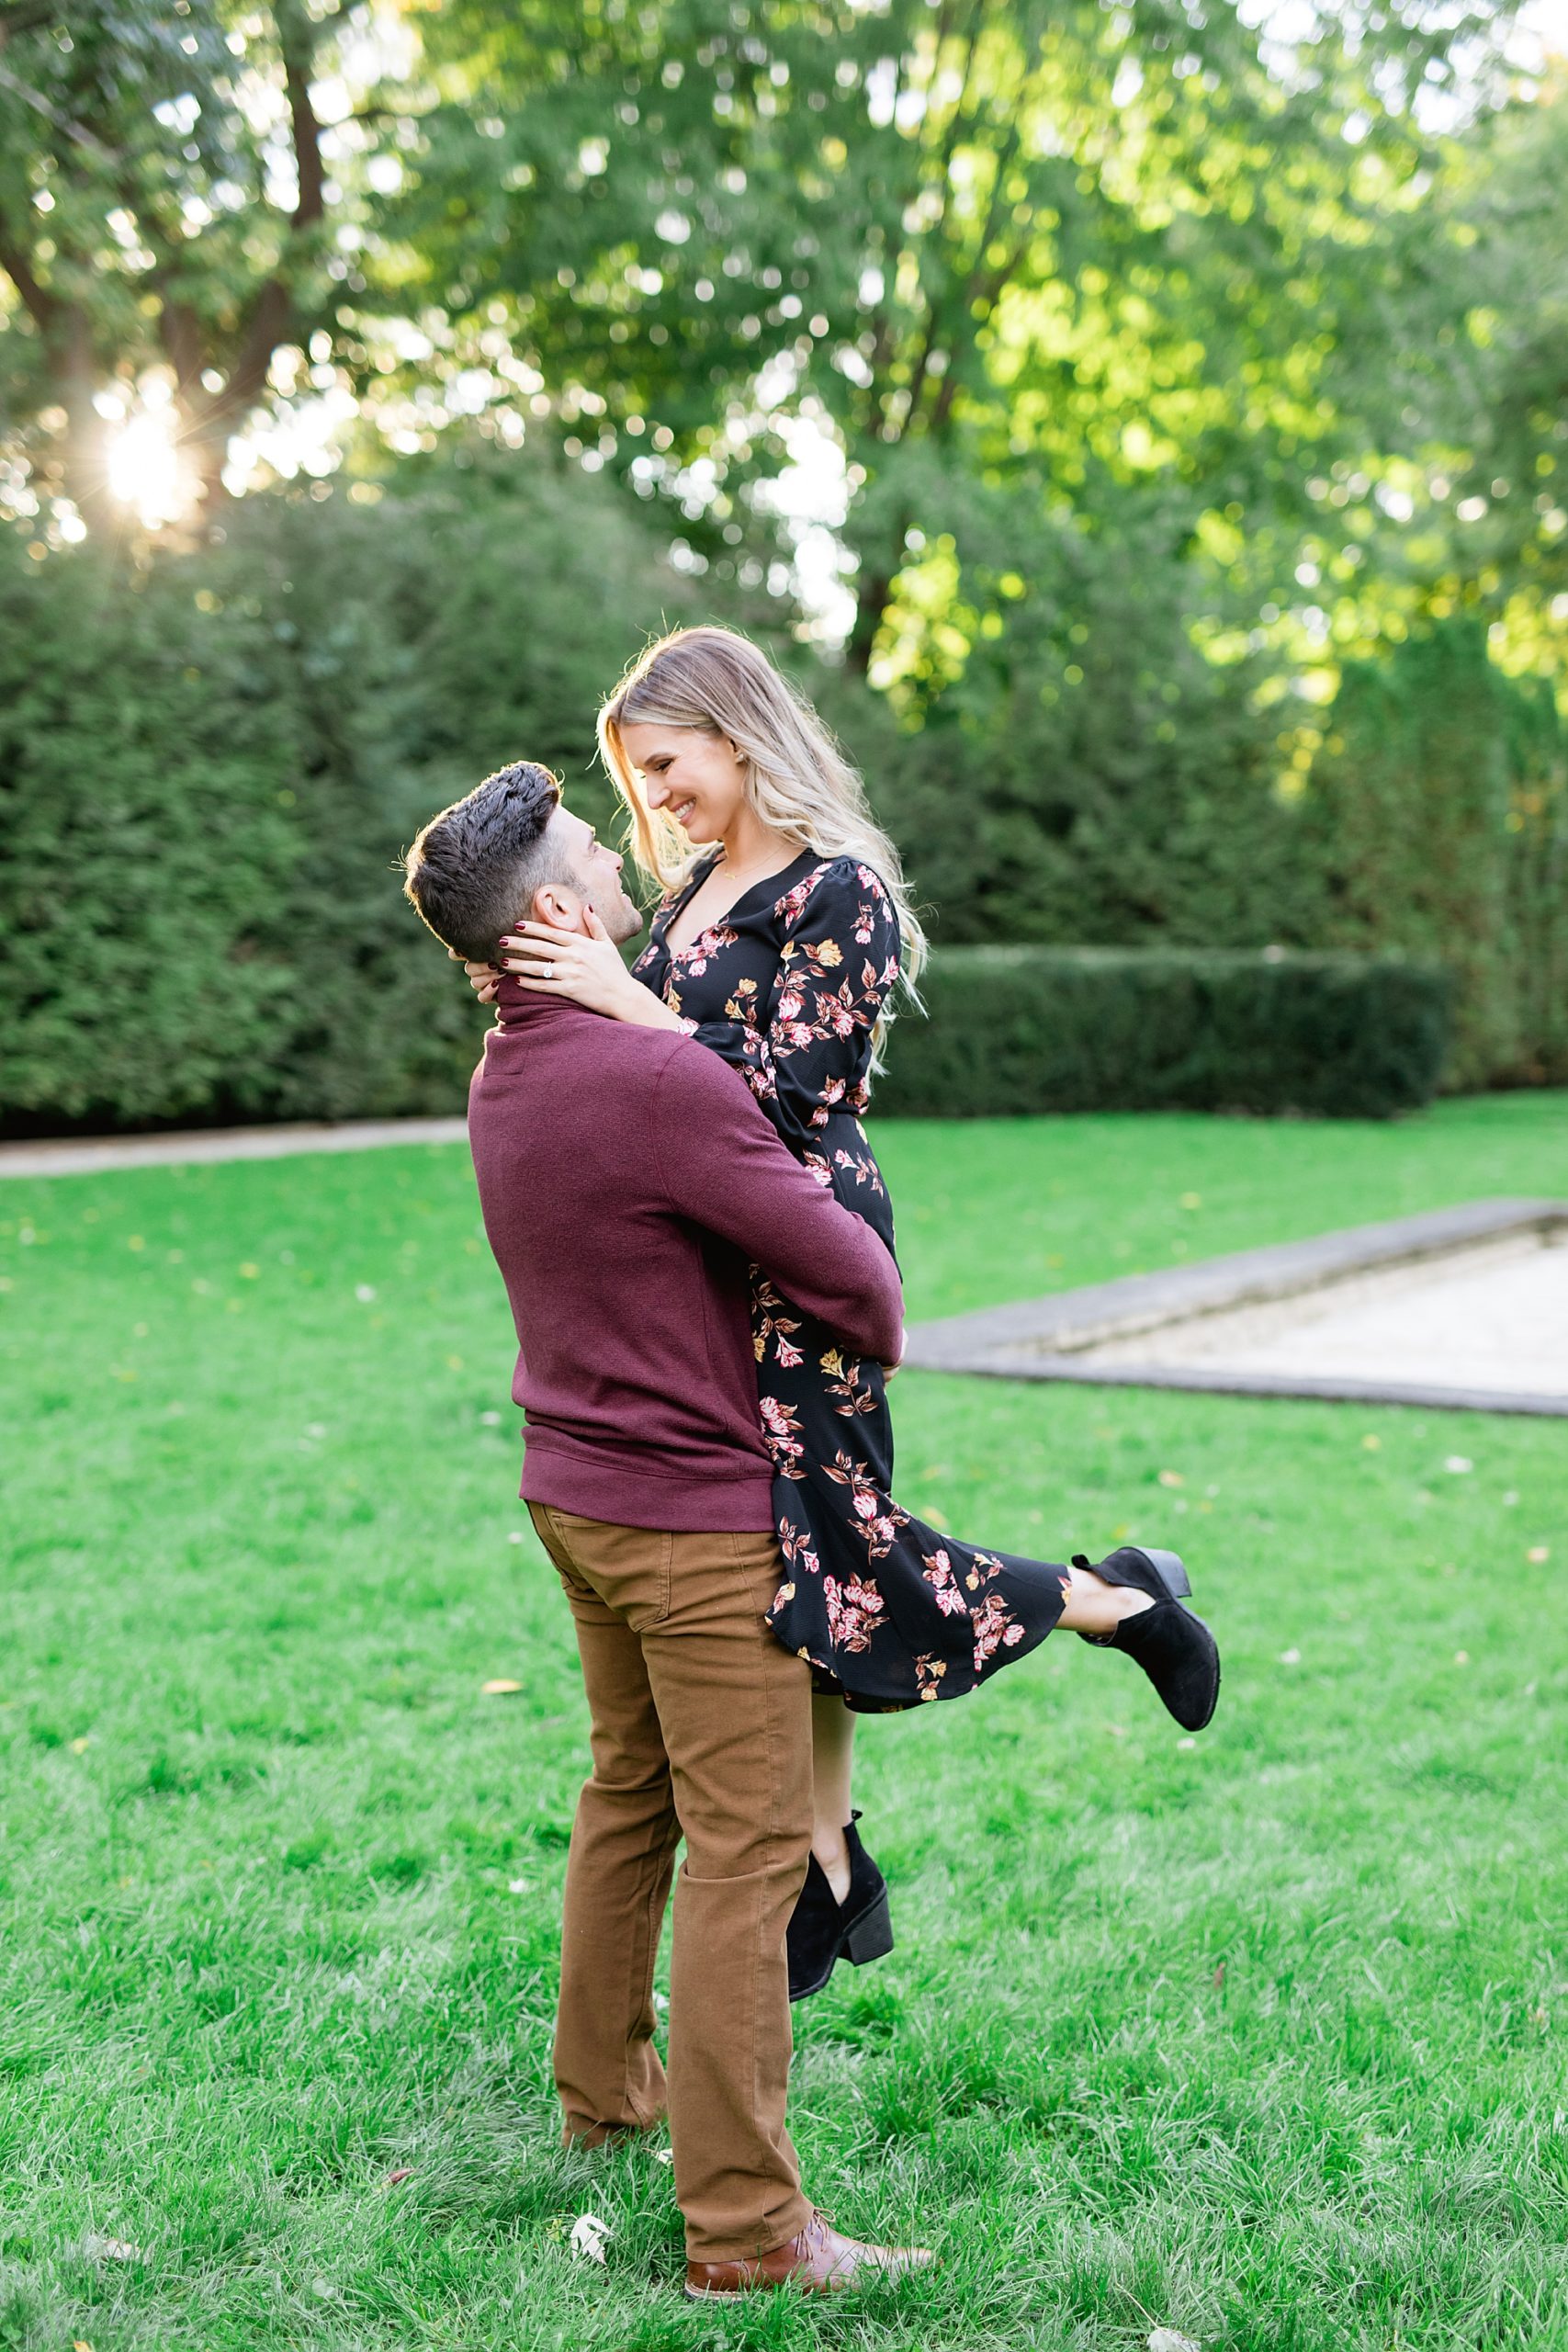 Bride to be picked up by her fiance photo | Breanne Rochelle Photography